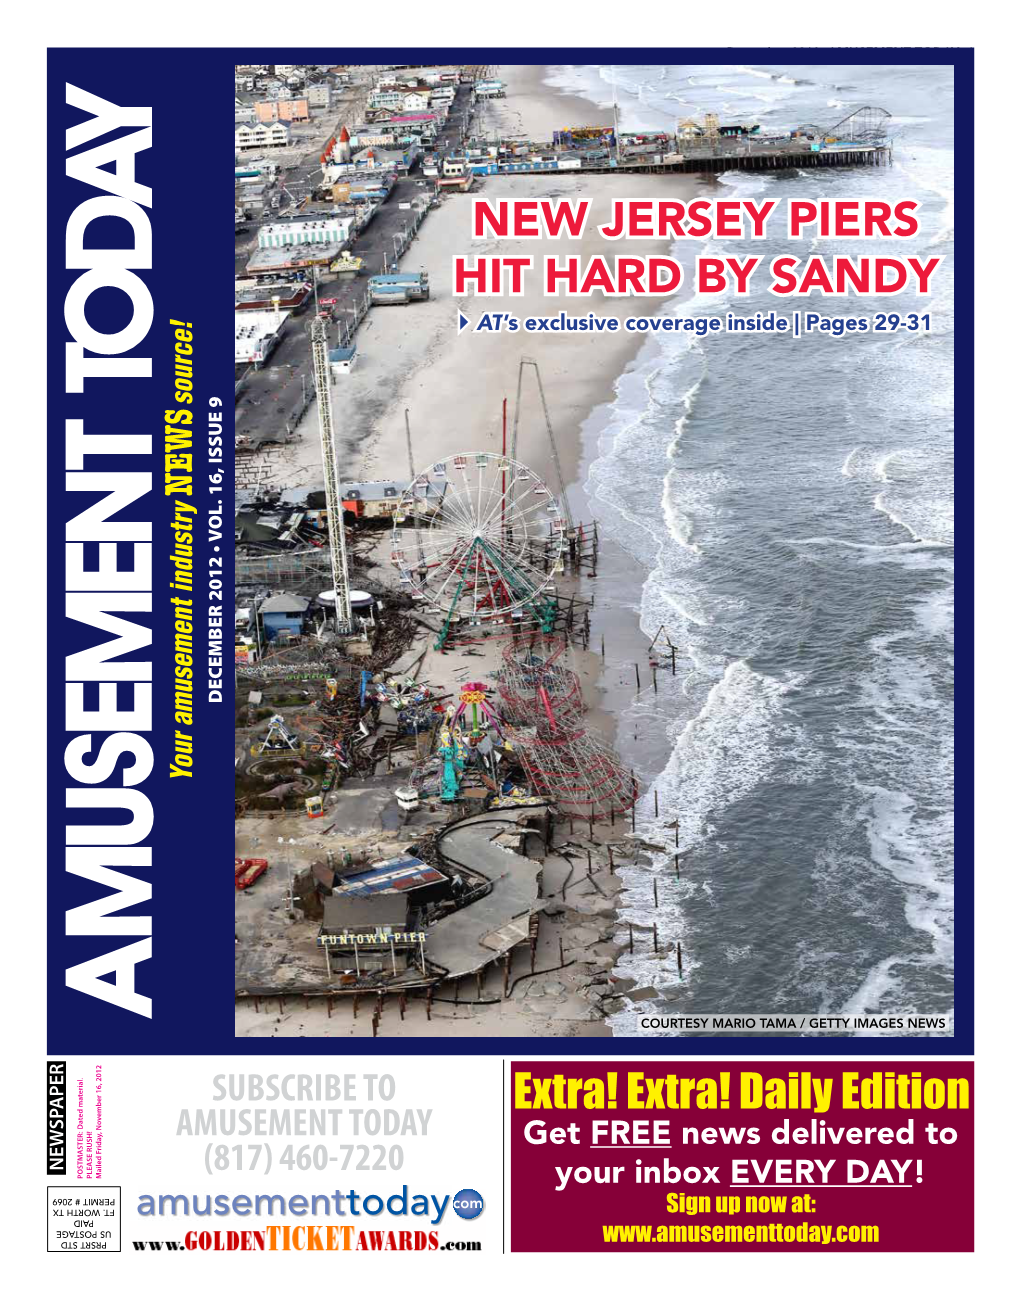 NEW JERSEY PIERS HIT HARD by SANDY  AT’S Exclusive Coverage Inside | Pages 29-31 DECEMBER 2012 • VOL